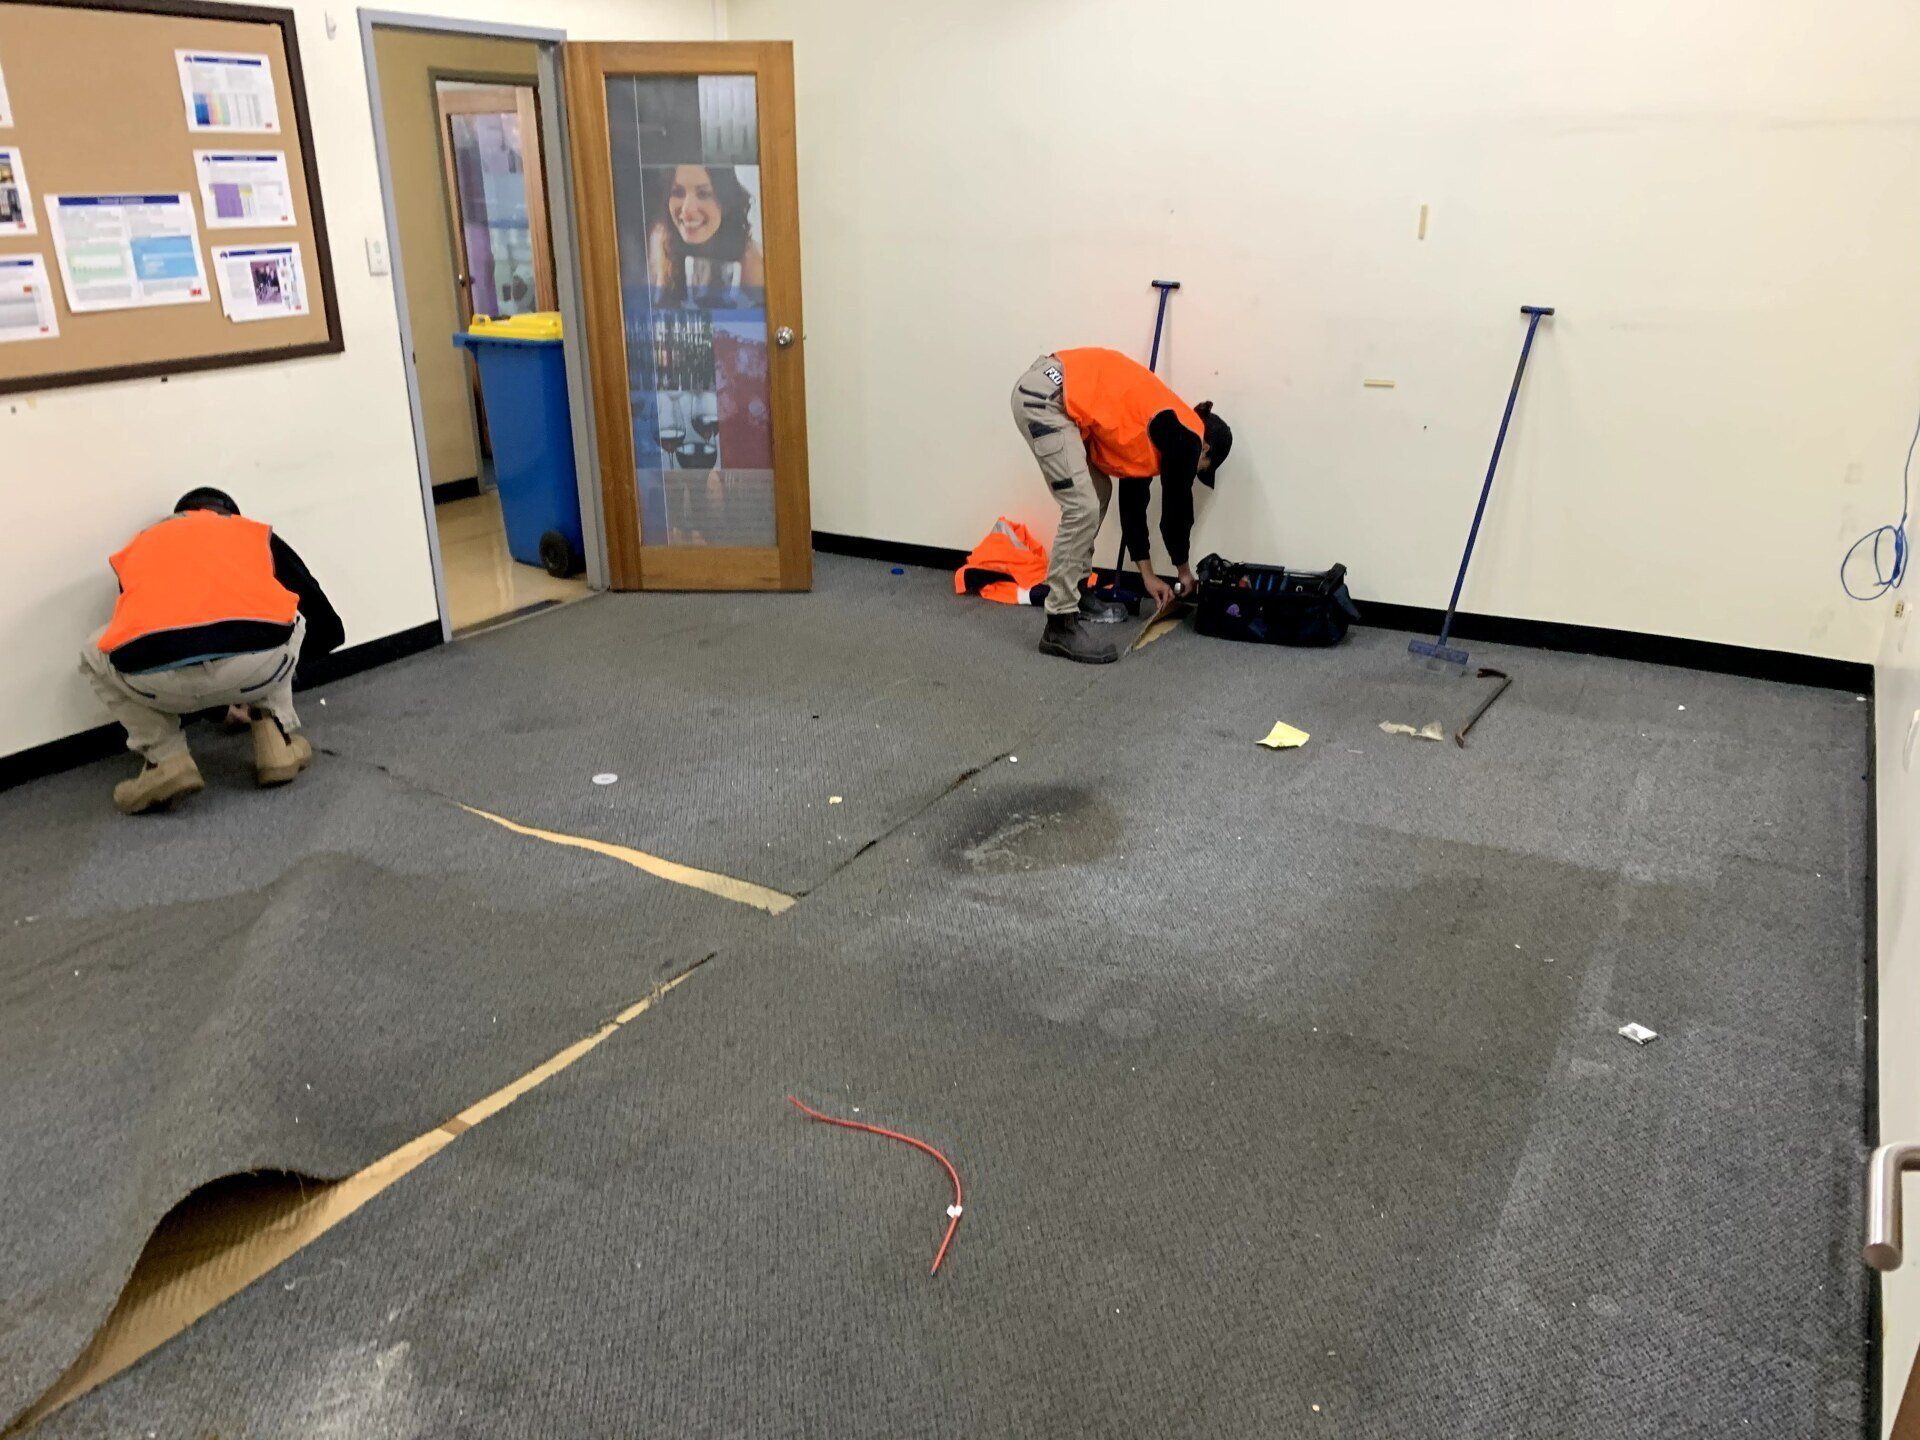 two men are working on a carpeted floor in a room .